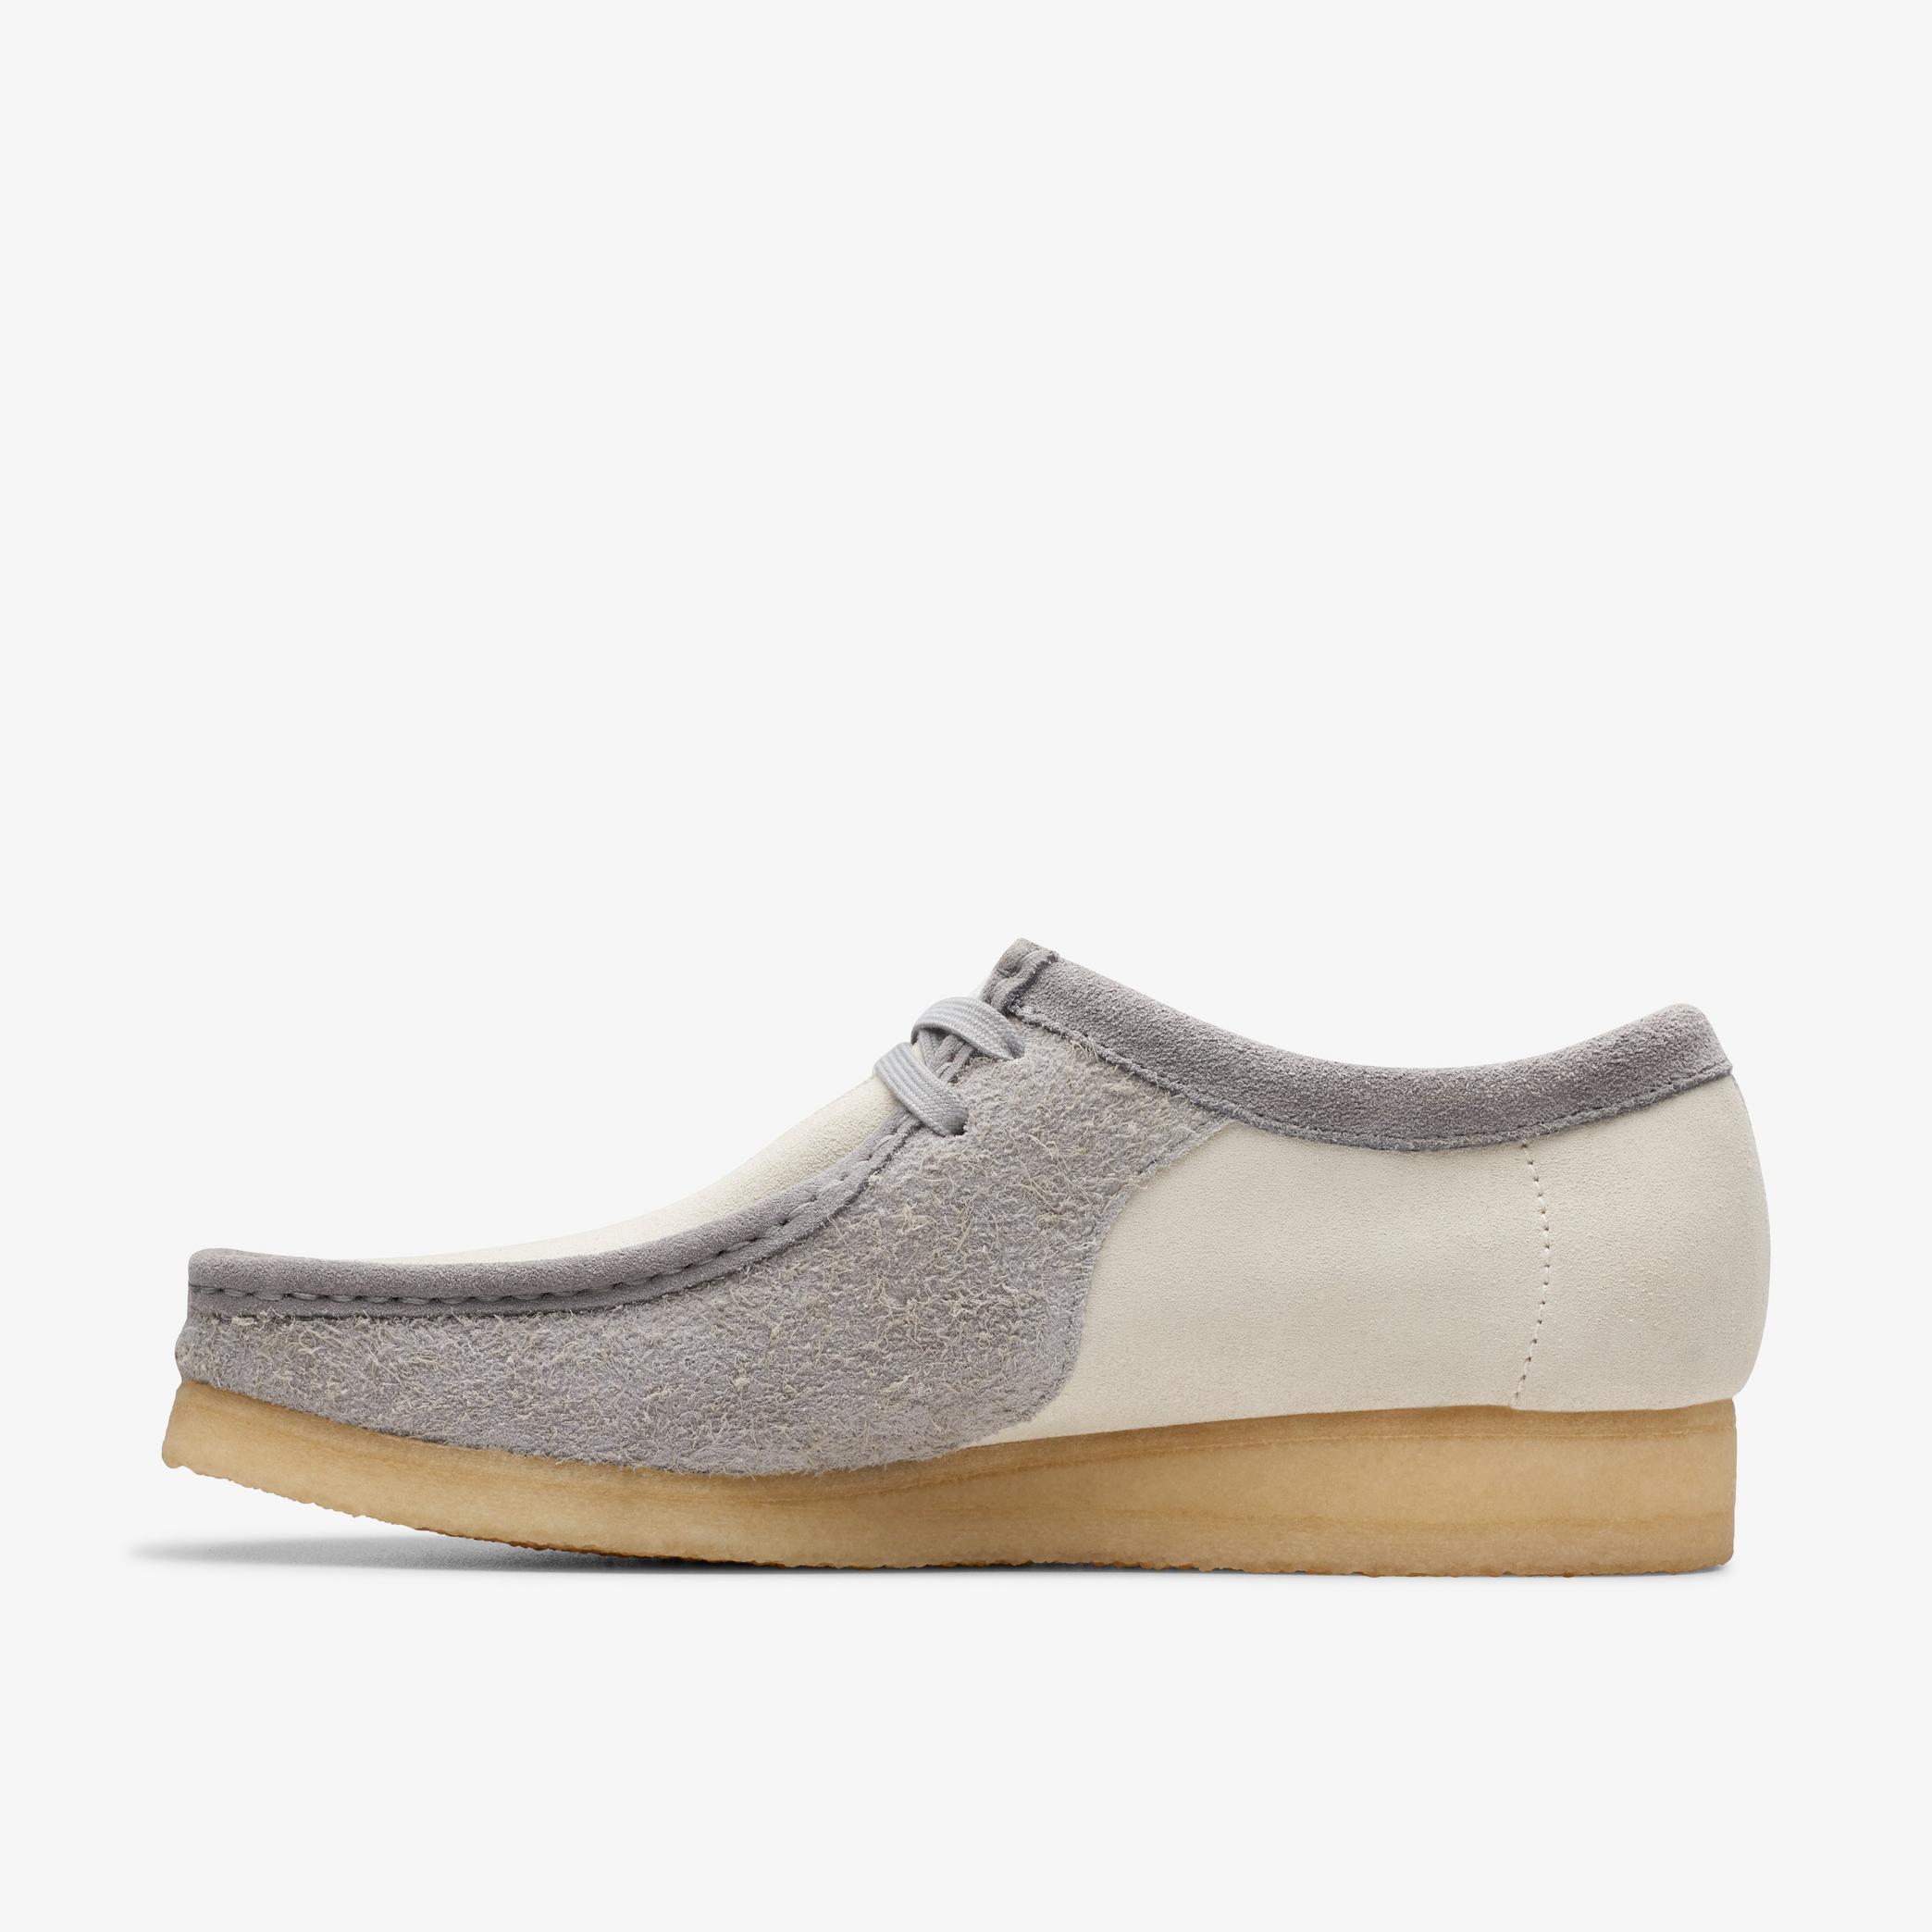 Wallabee Grey/Off White Wallabee, view 2 of 7